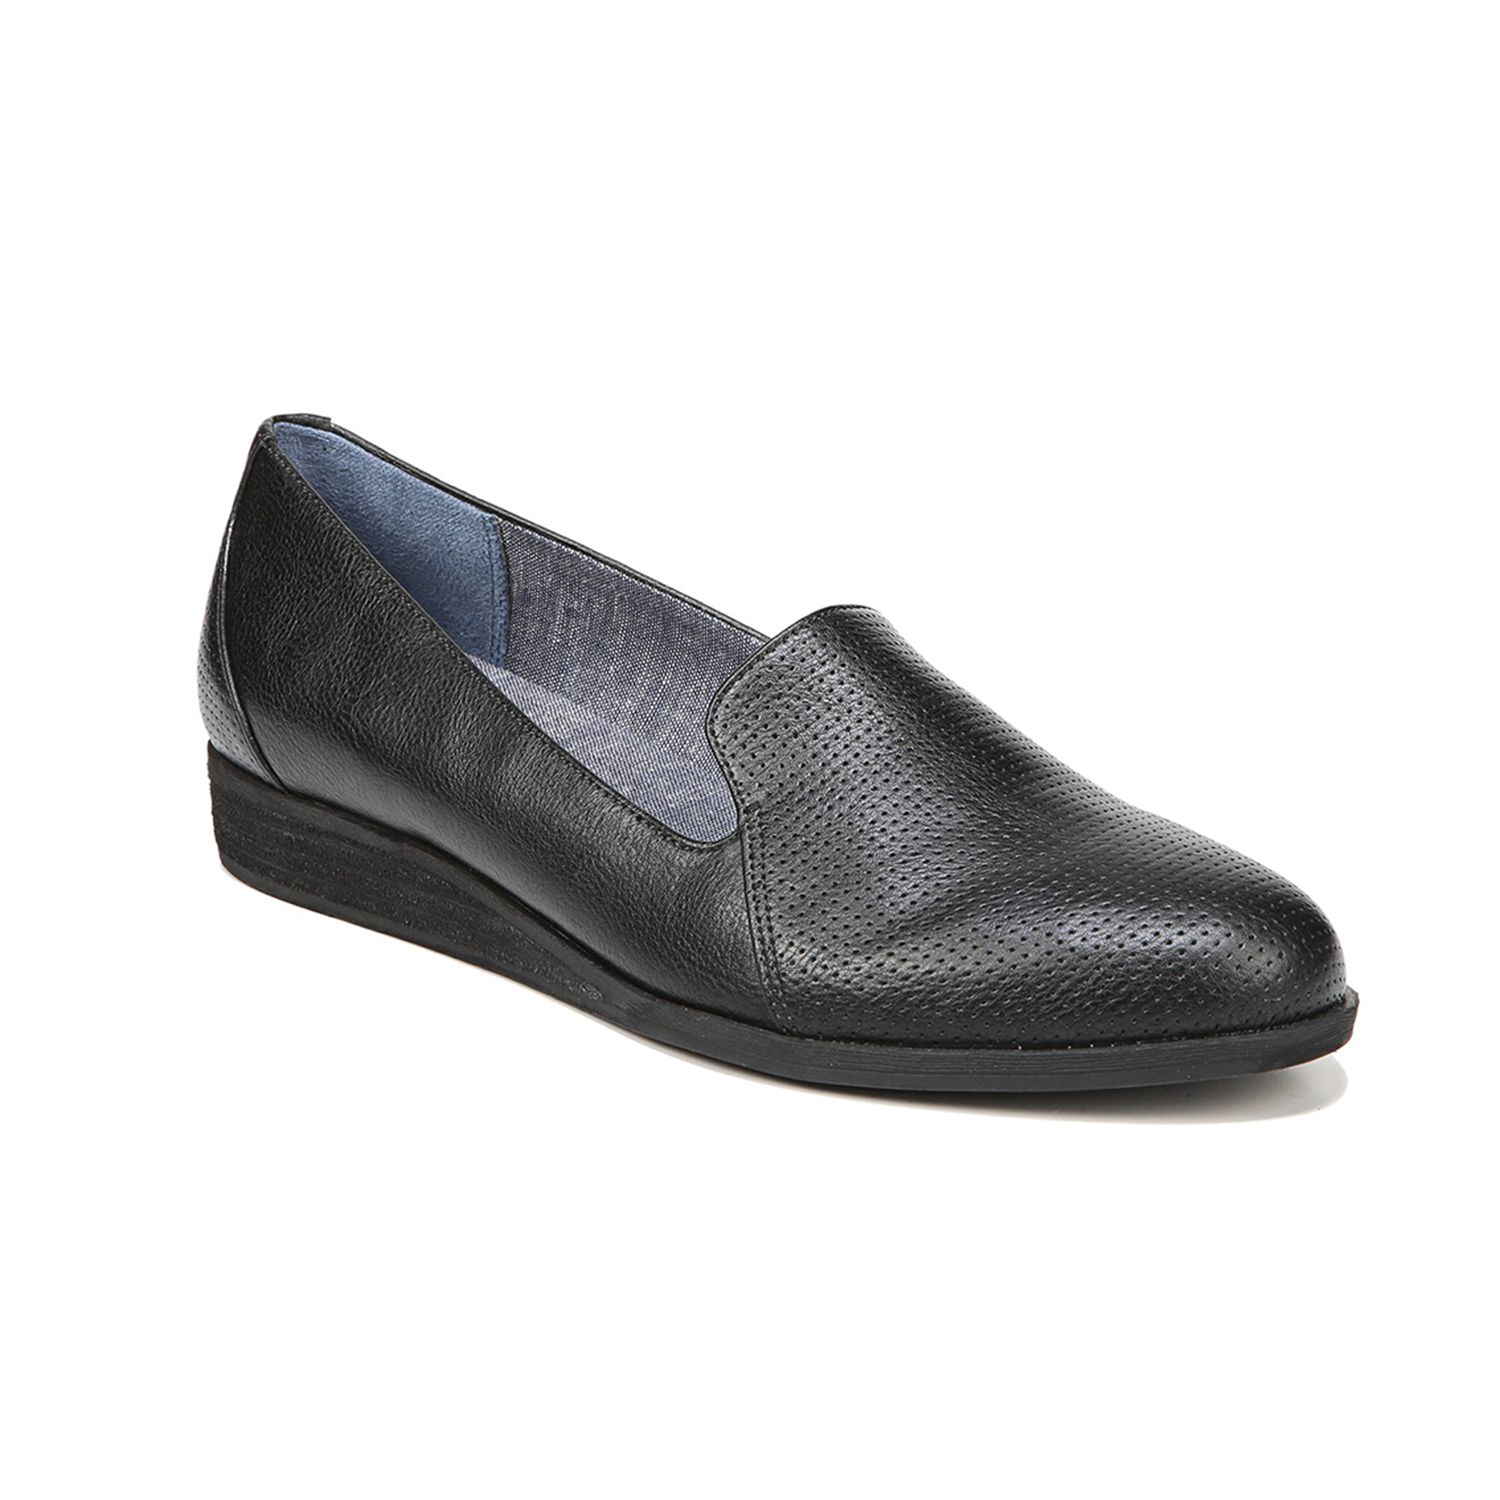 Dr. Scholl's Daily Women's Loafers